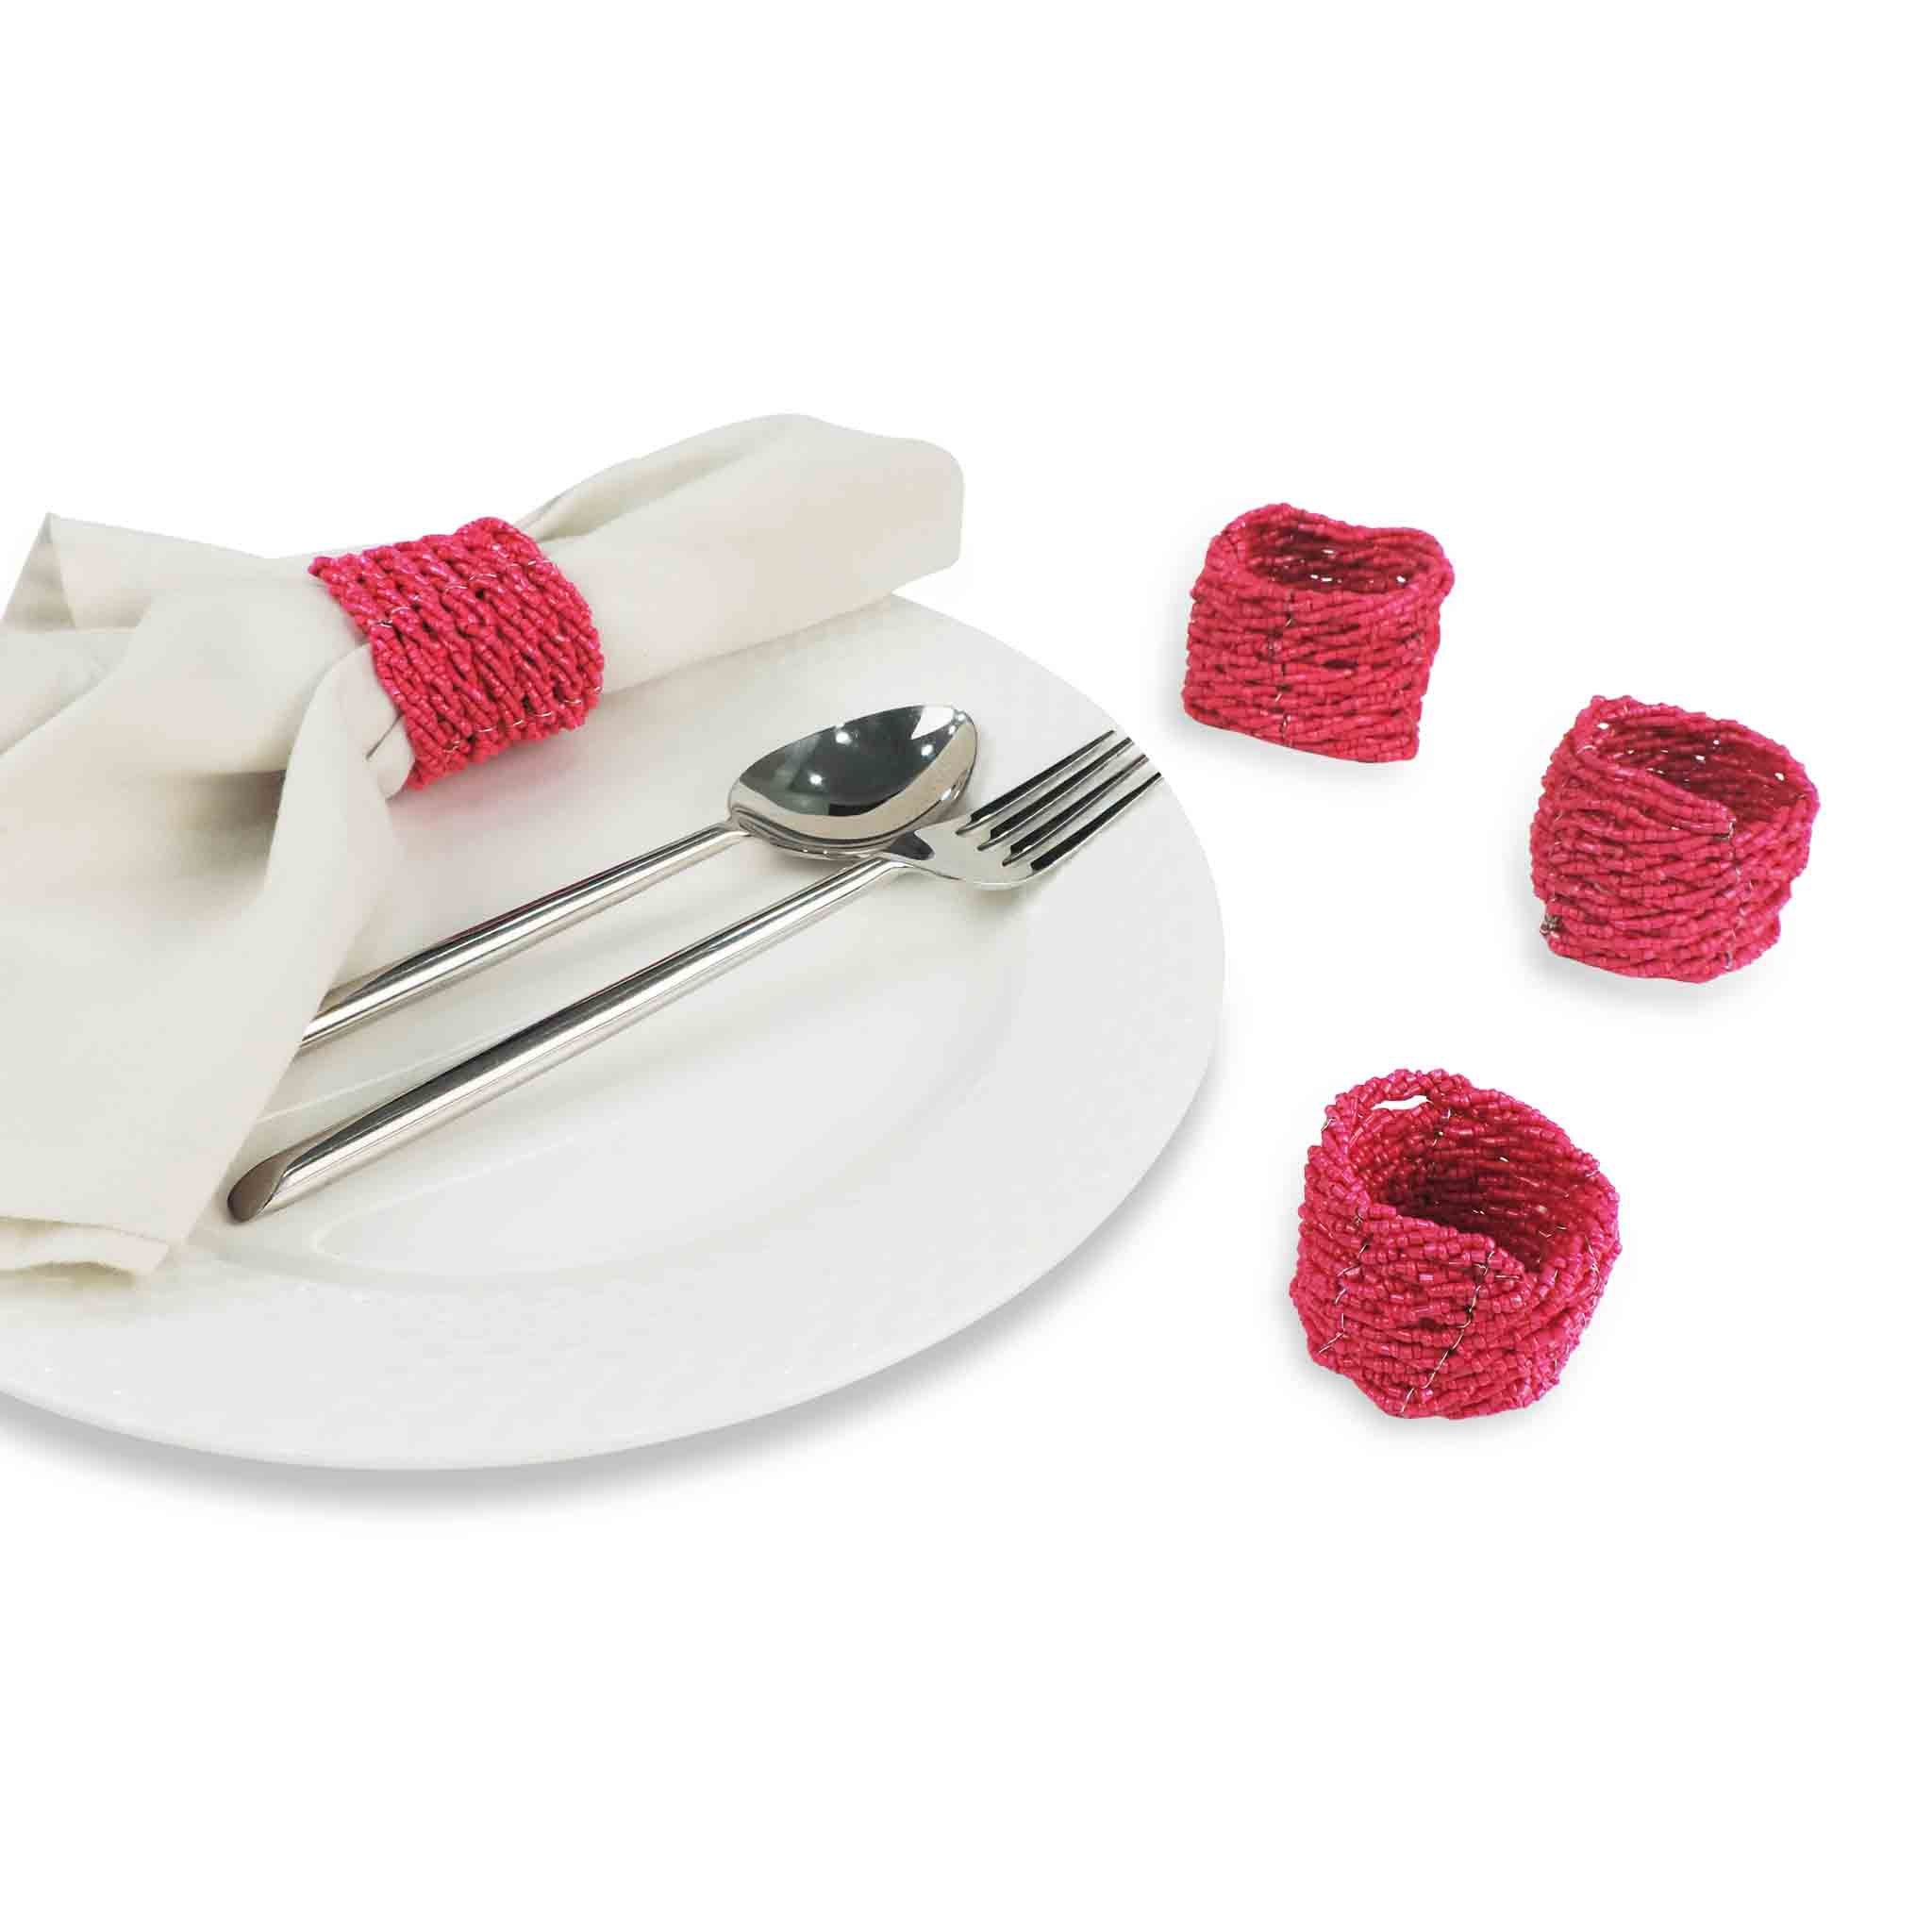 Jute Coil Napkin Ring in Pink, Set of 4